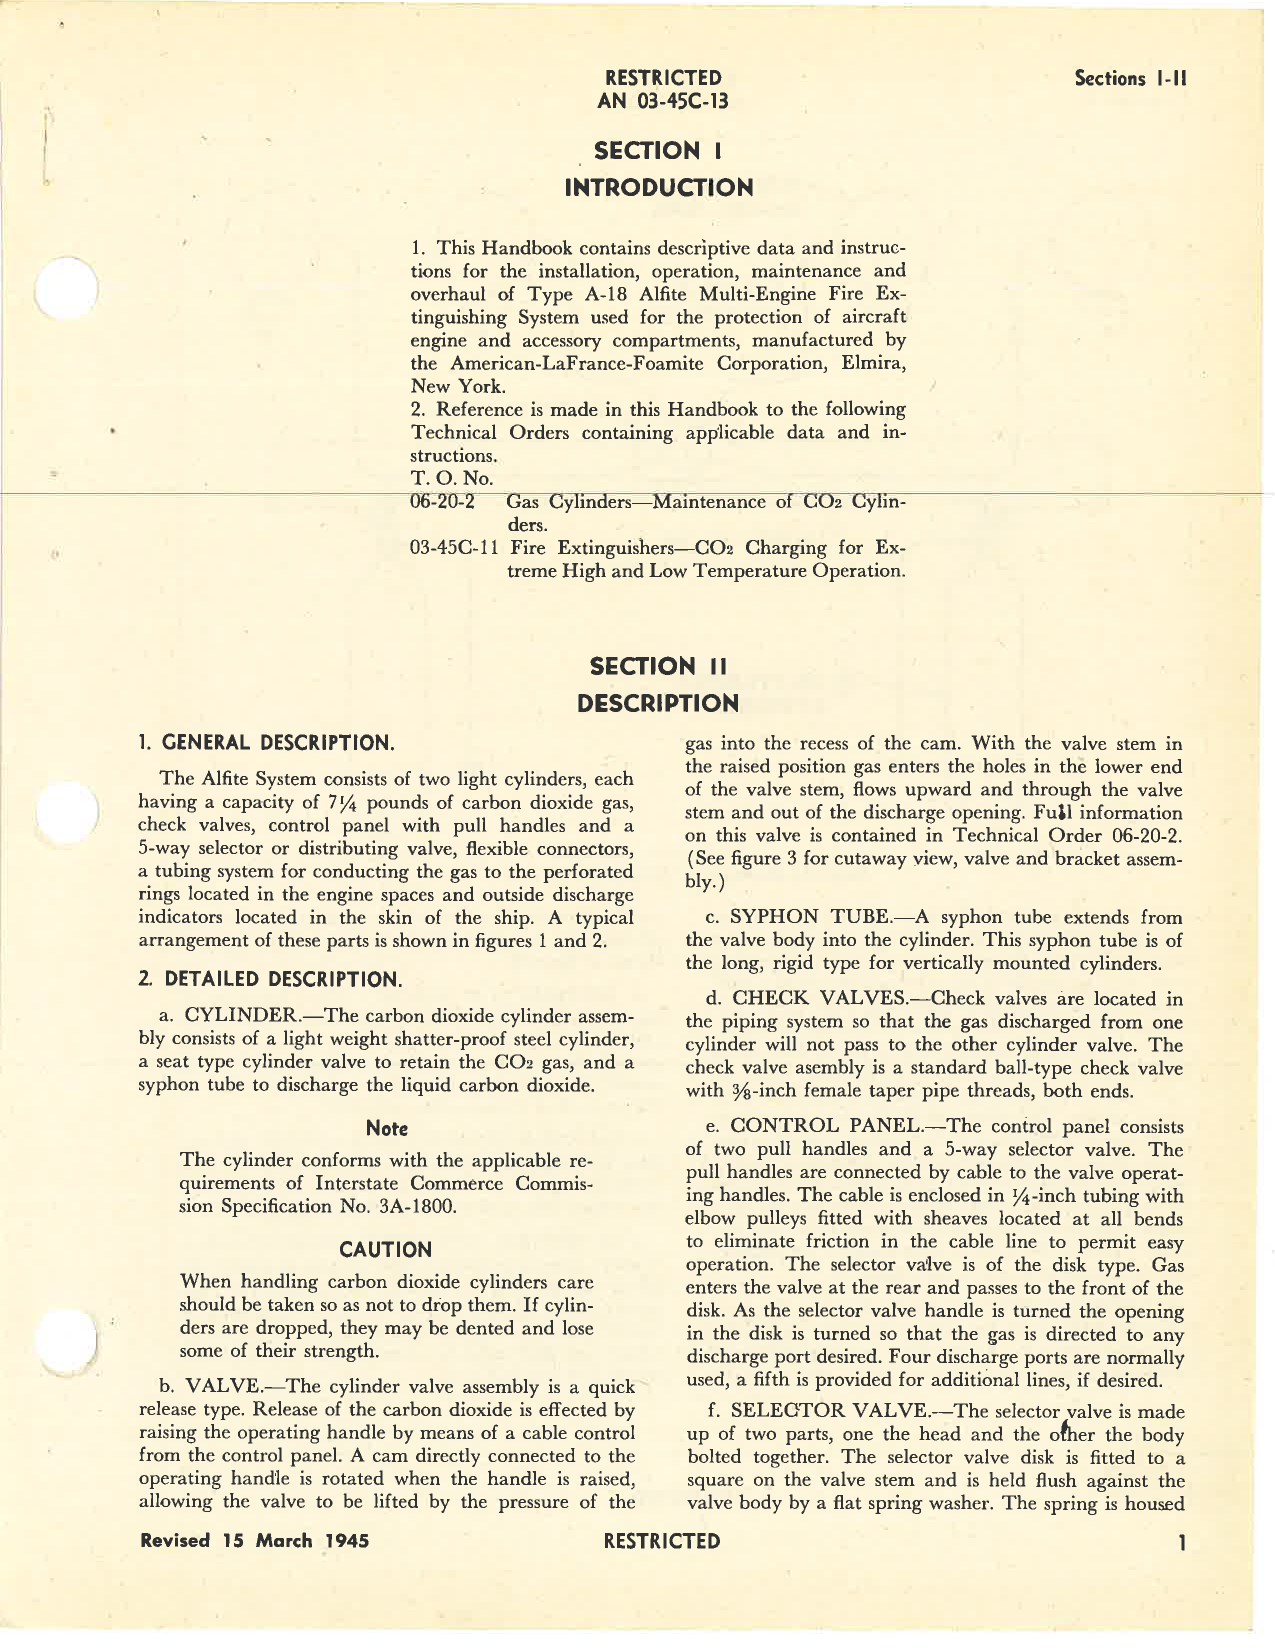 Sample page 5 from AirCorps Library document: Handbook of Instructions with Parts Catalog for Type A-18 Multi-Engine Fire Extinguishing System